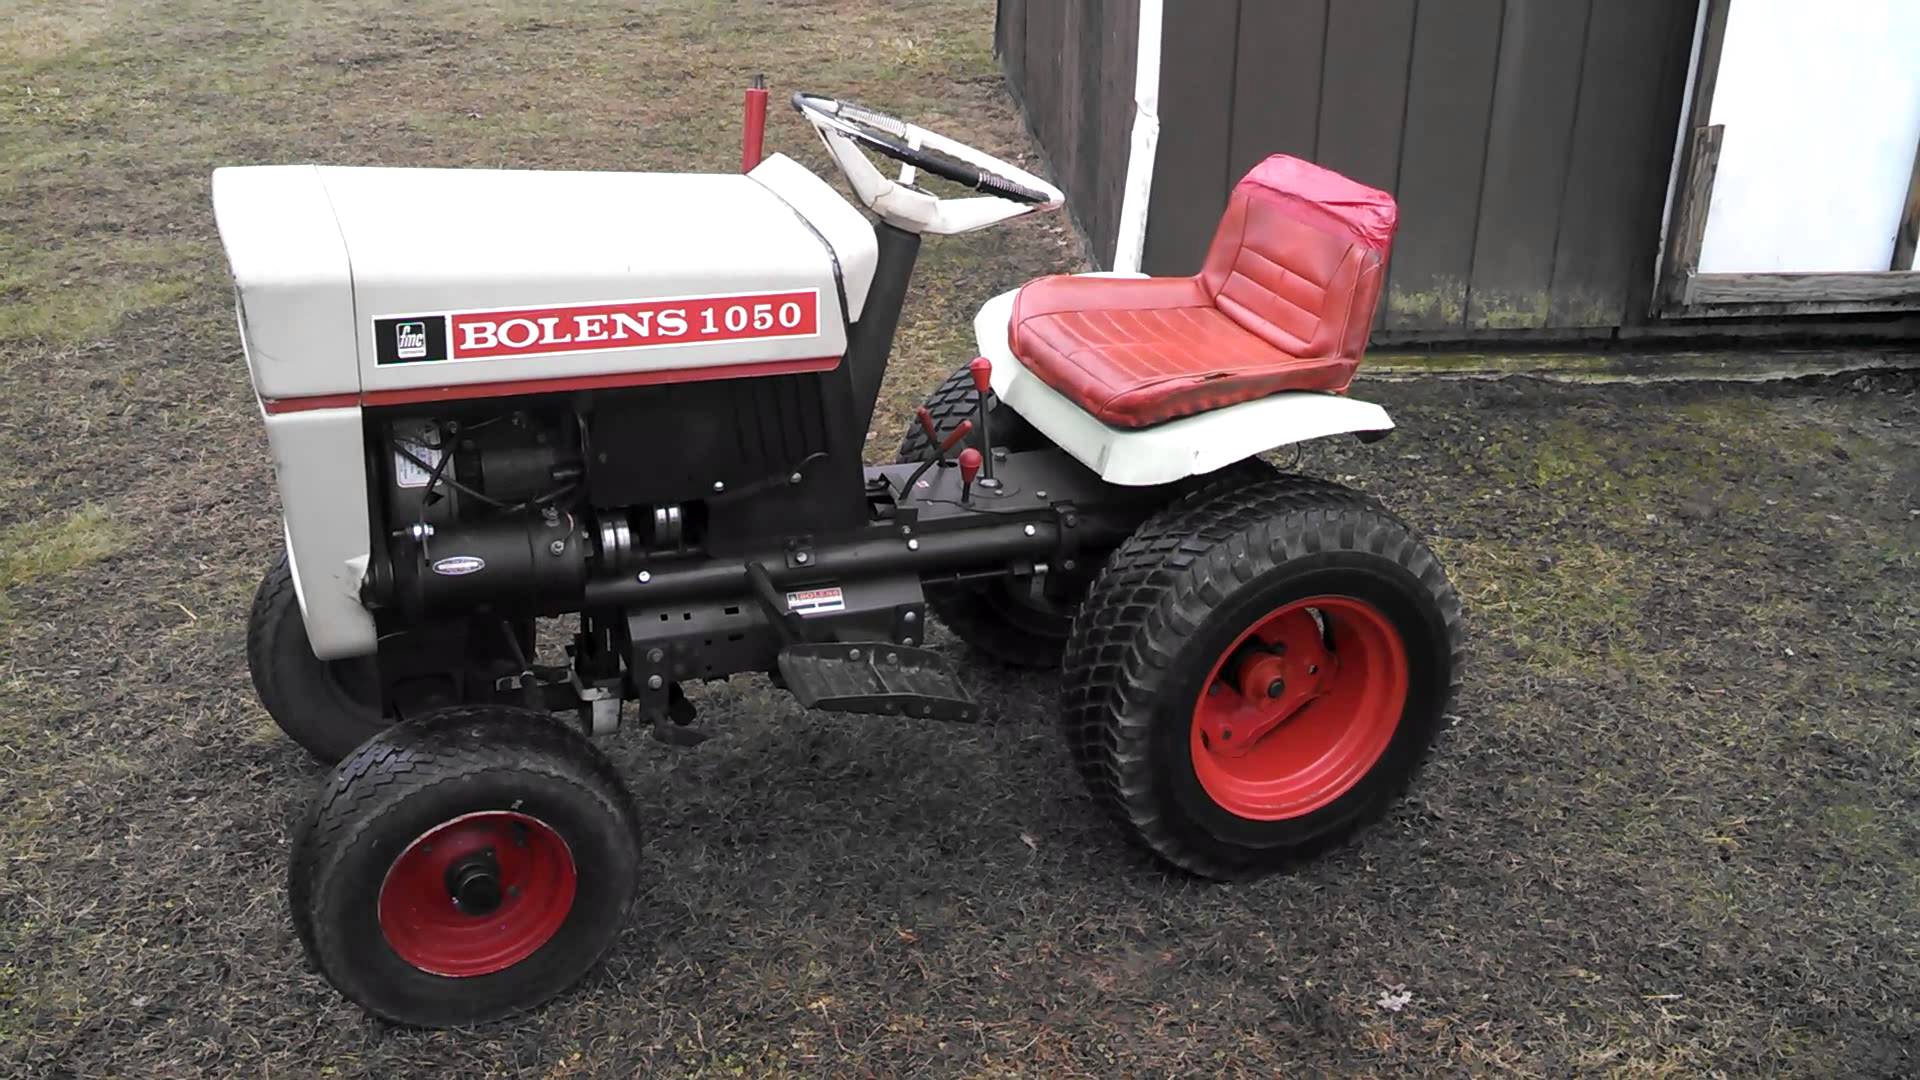 For Sale 1968 Bolens 1050 SOLD SOLD - YouTube